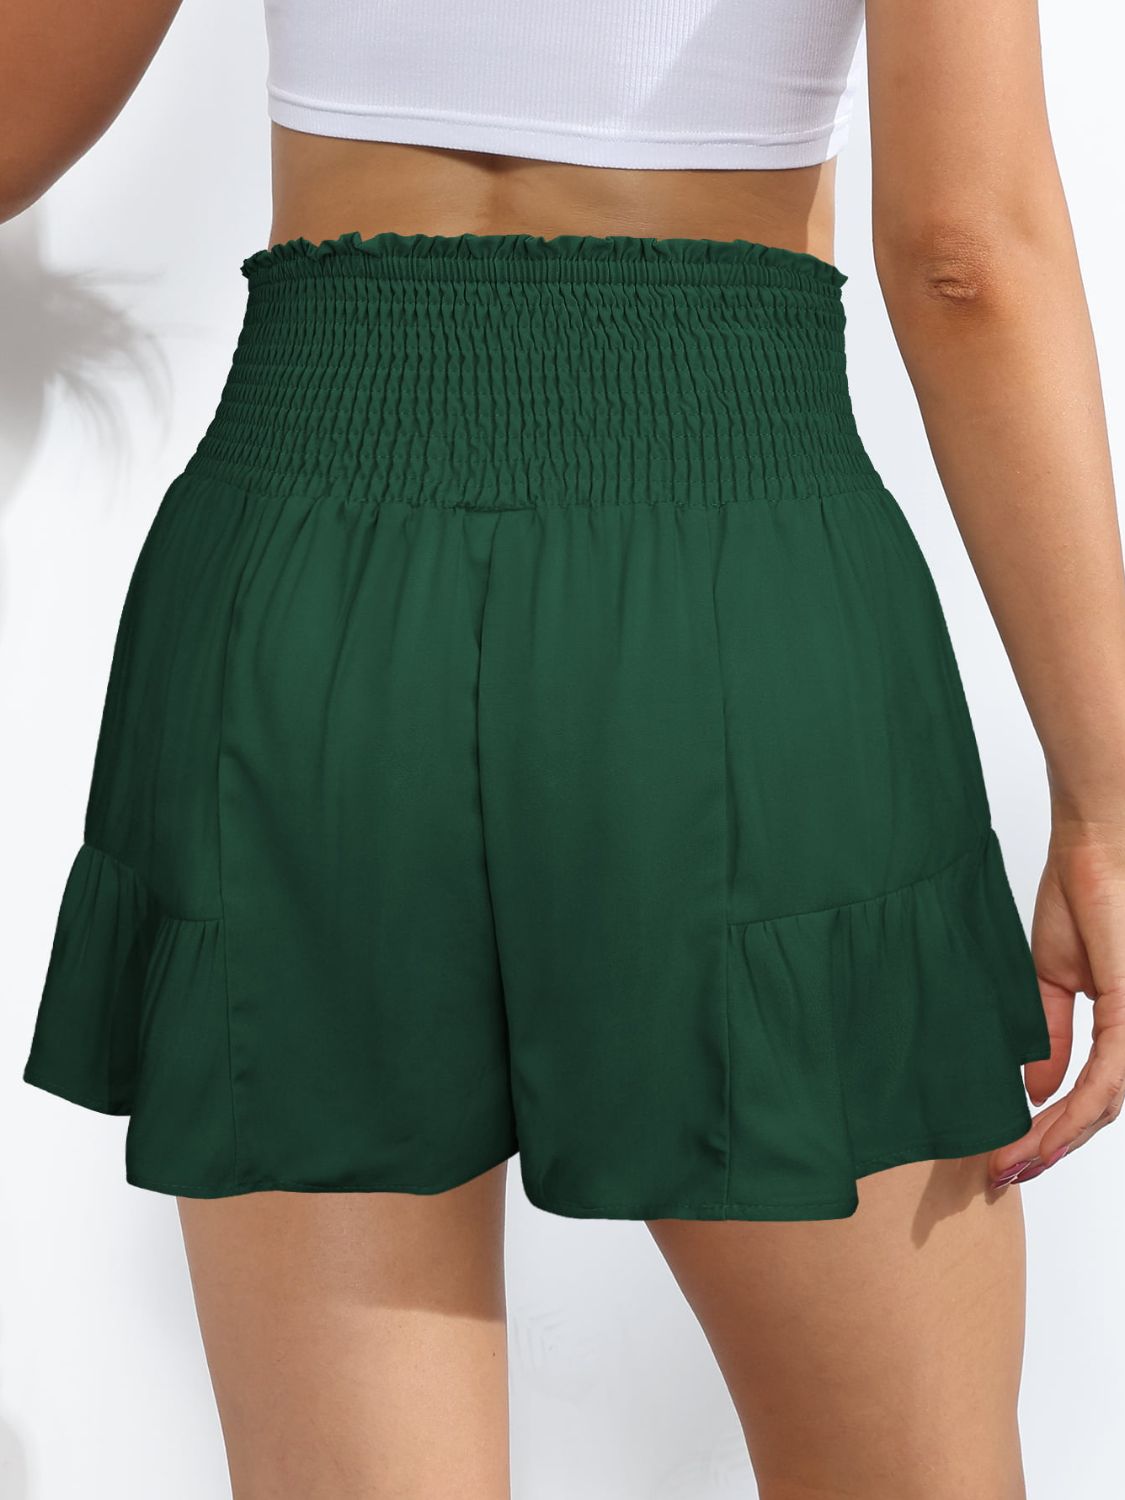 Smocked Tie-Front High-Rise Shorts - Fashion Girl Online Store